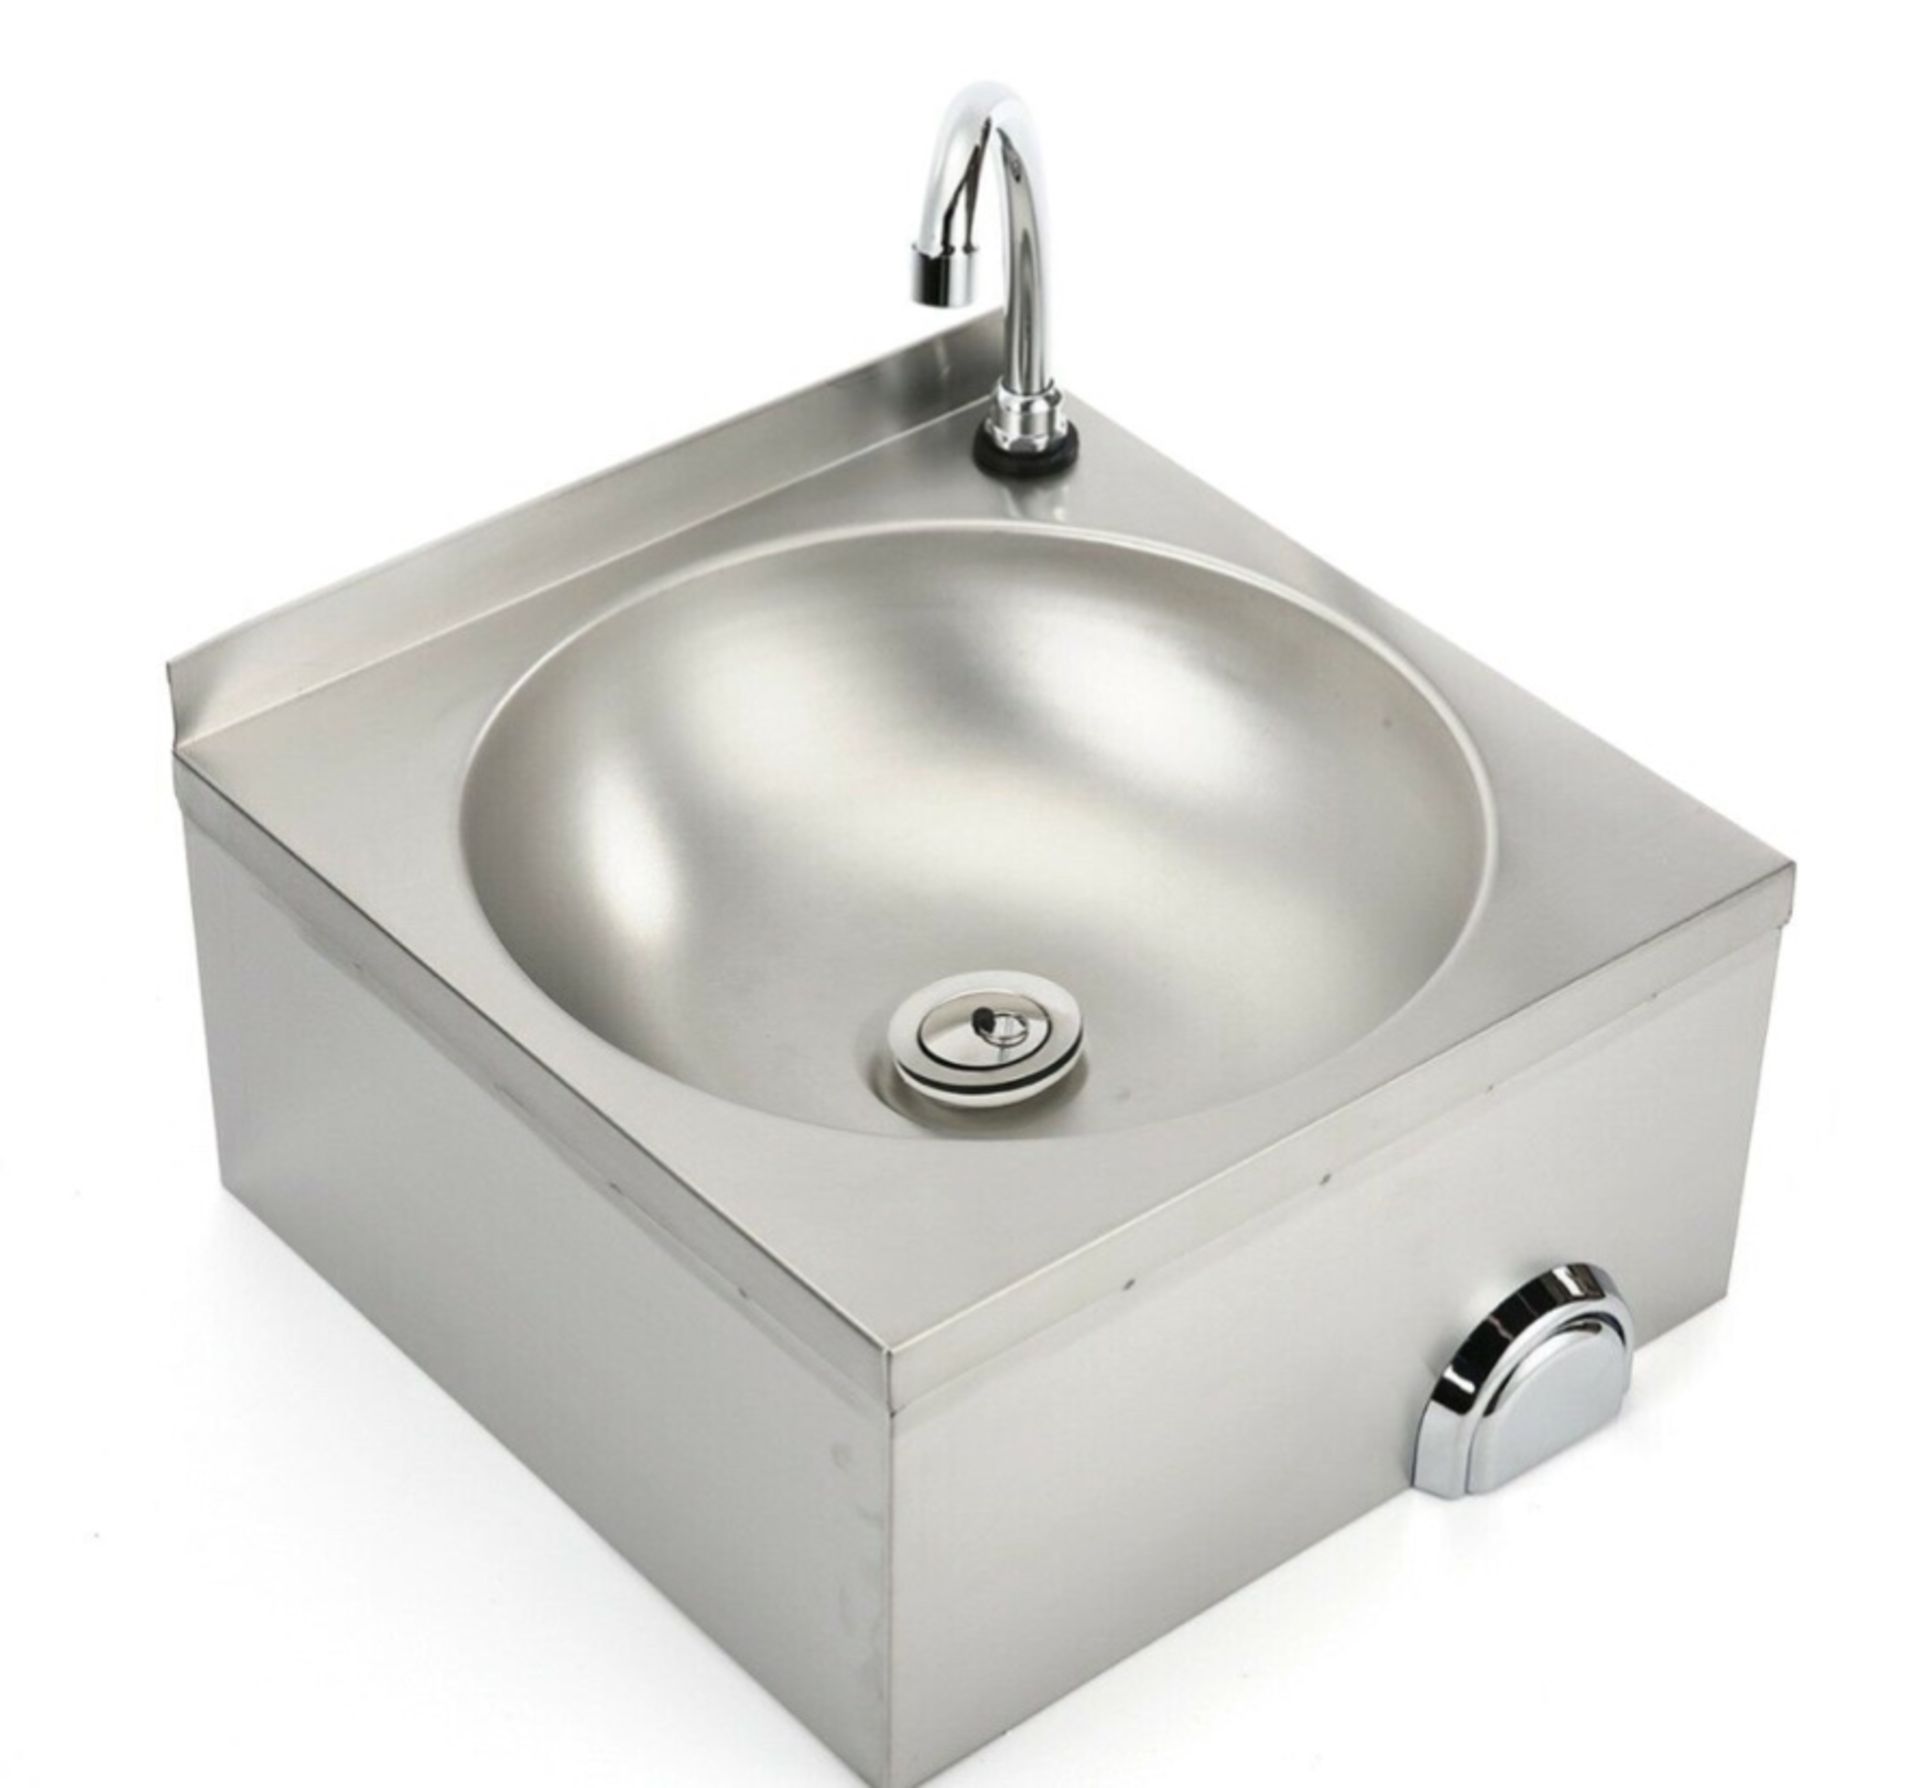 Brand New Knee Operated Stainless Sink in Box